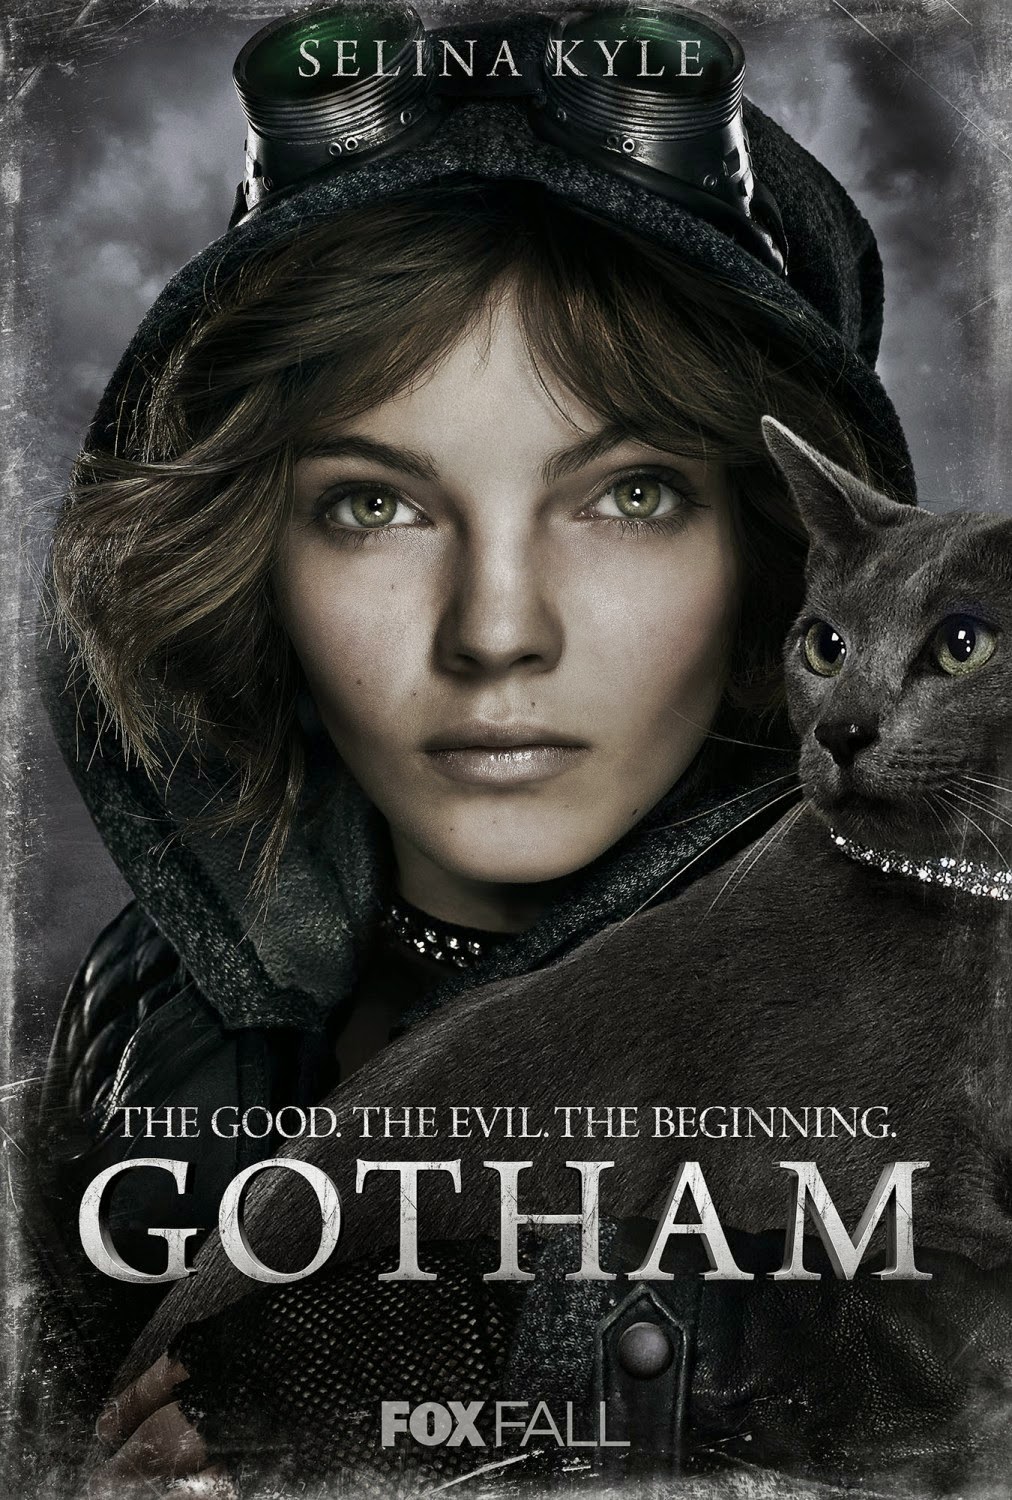 Gotham “The Good. The Evil. The Beginning.” Character TV Poster Set - Camren Bicondova as Selina Kyle-Catwoman